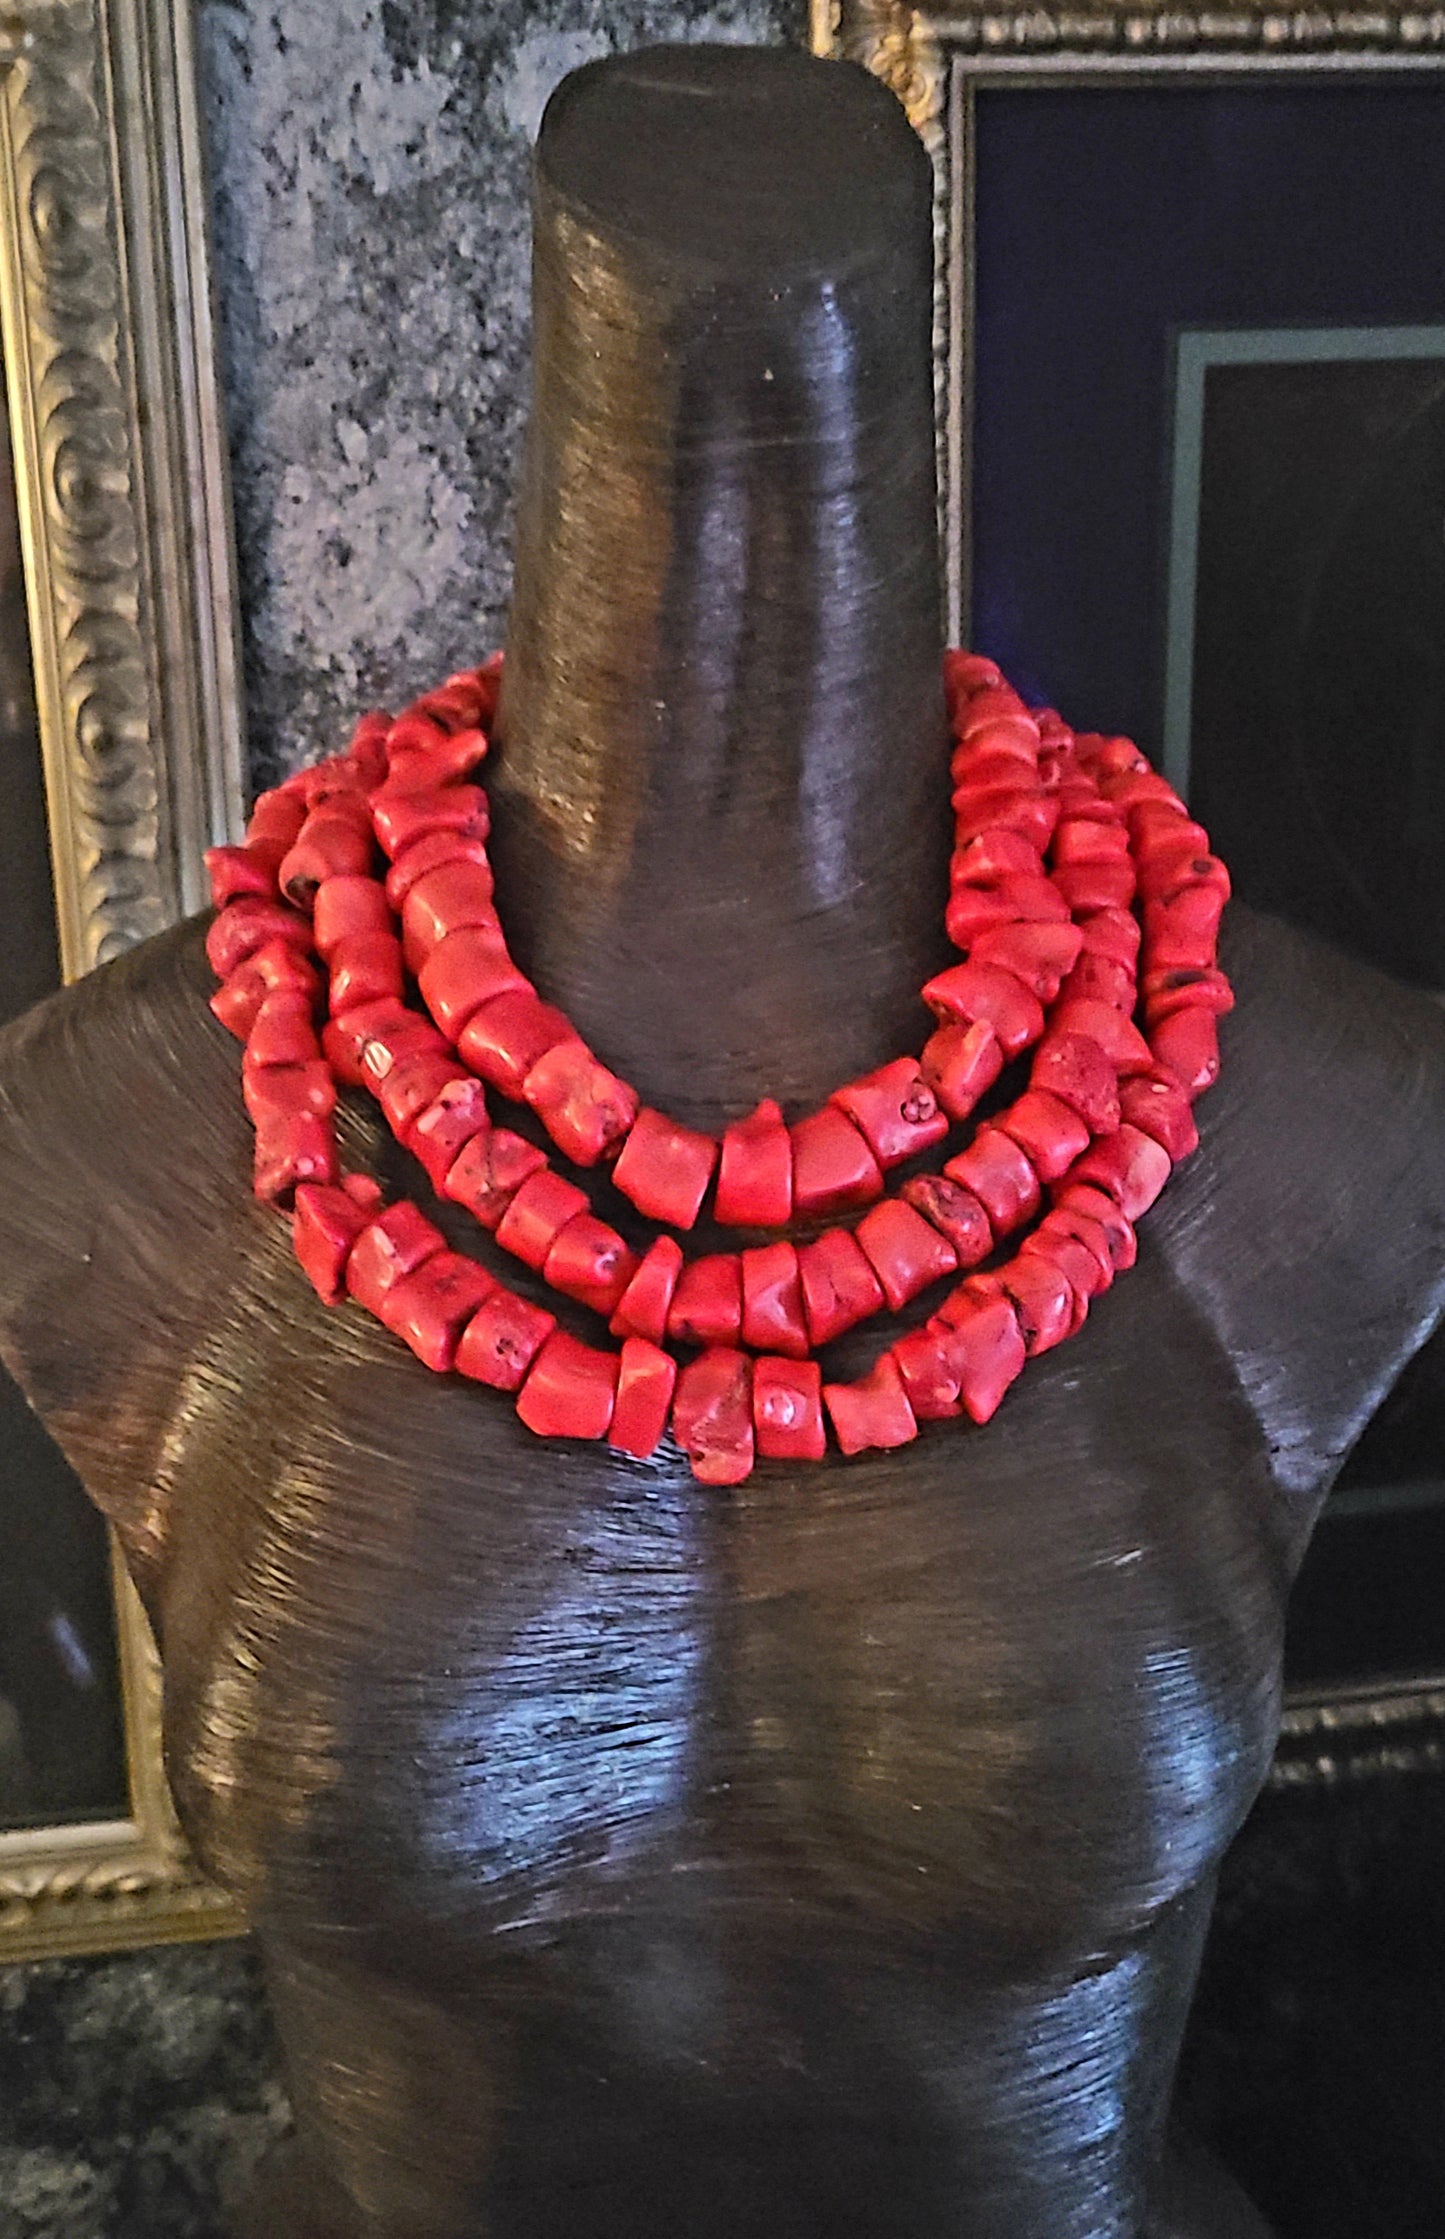 Triple Strand Red Coral Nugget Statement Necklace with Detachable Rhinestone Rose Brooch